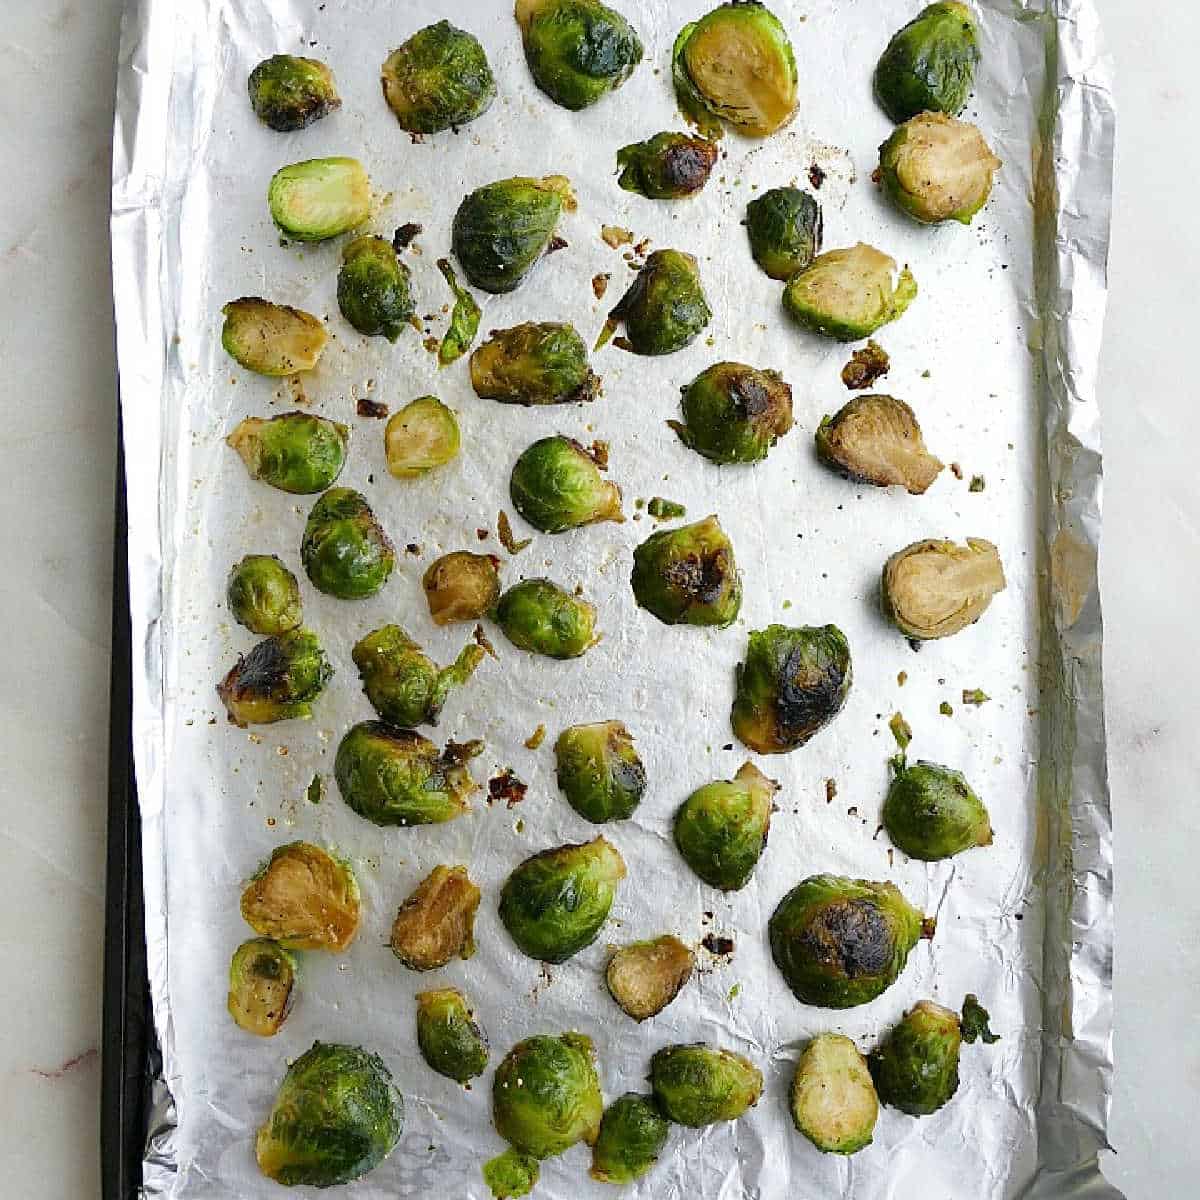 Brussels sprouts baked on a baking sheet lined with foil